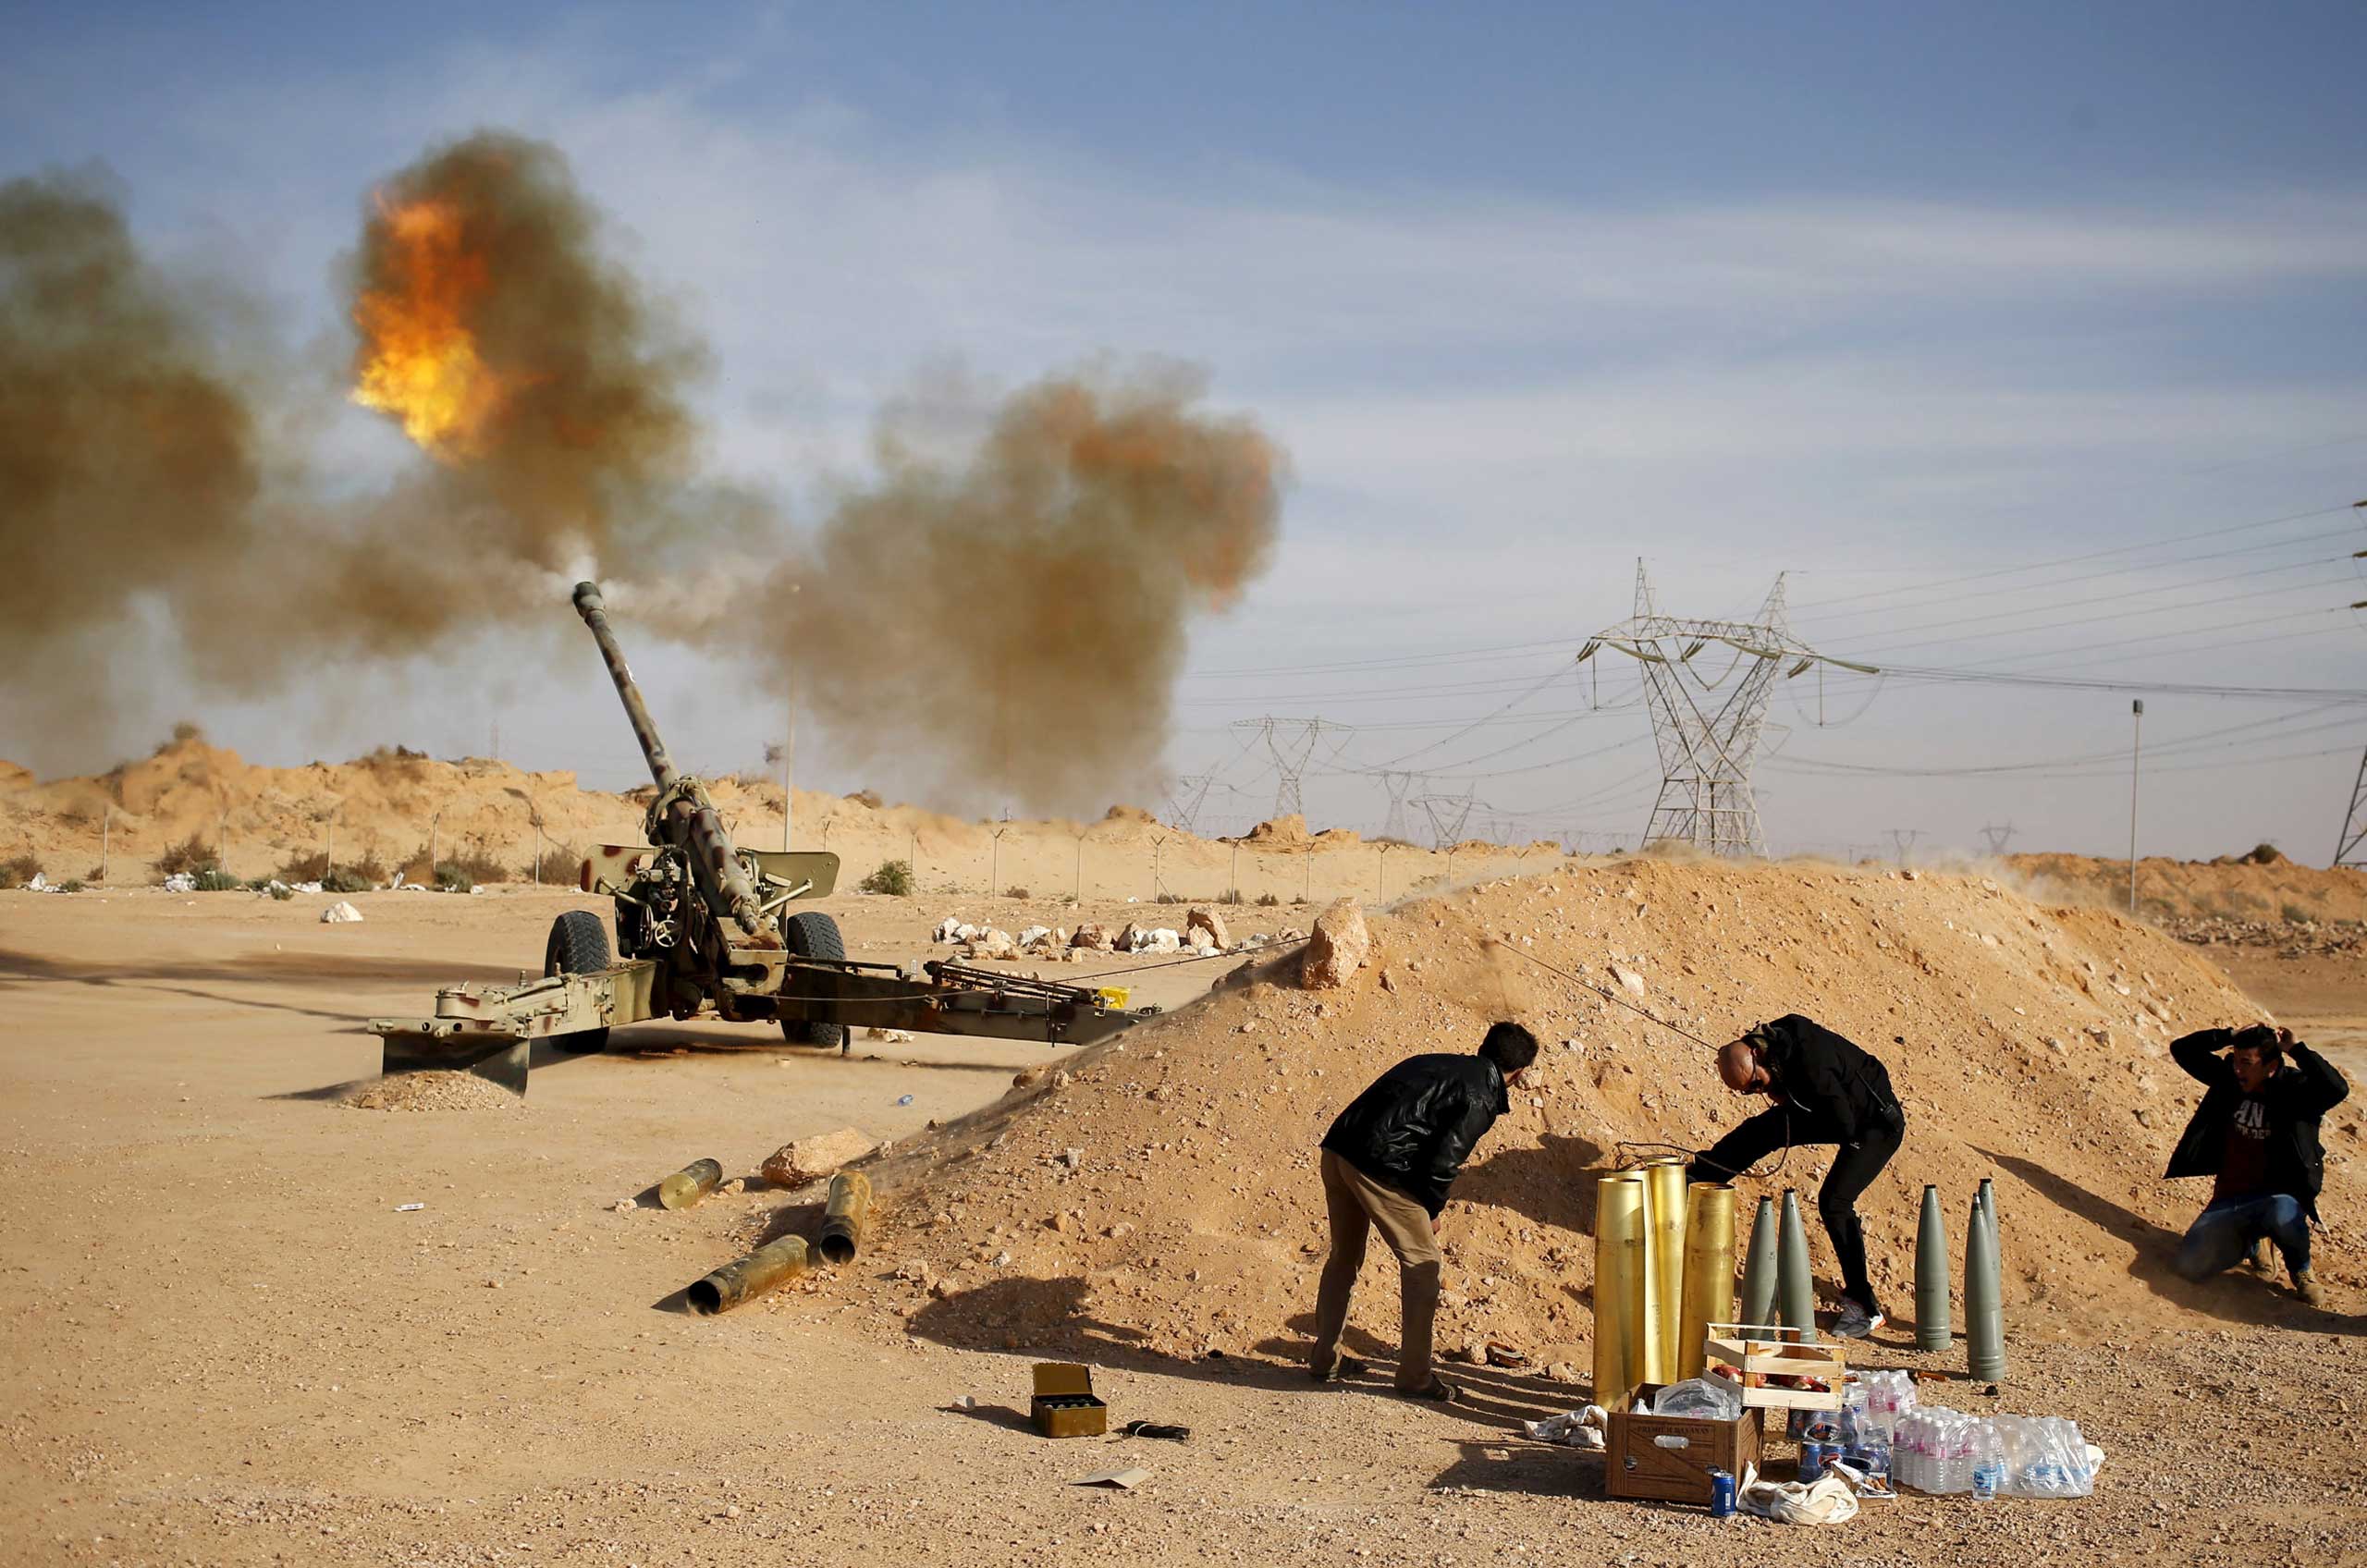 Libya Dawn fighters fire an artillery cannon at ISIS militants near Sirte in  March 2015. (Goran Tomasevic— Reuters)